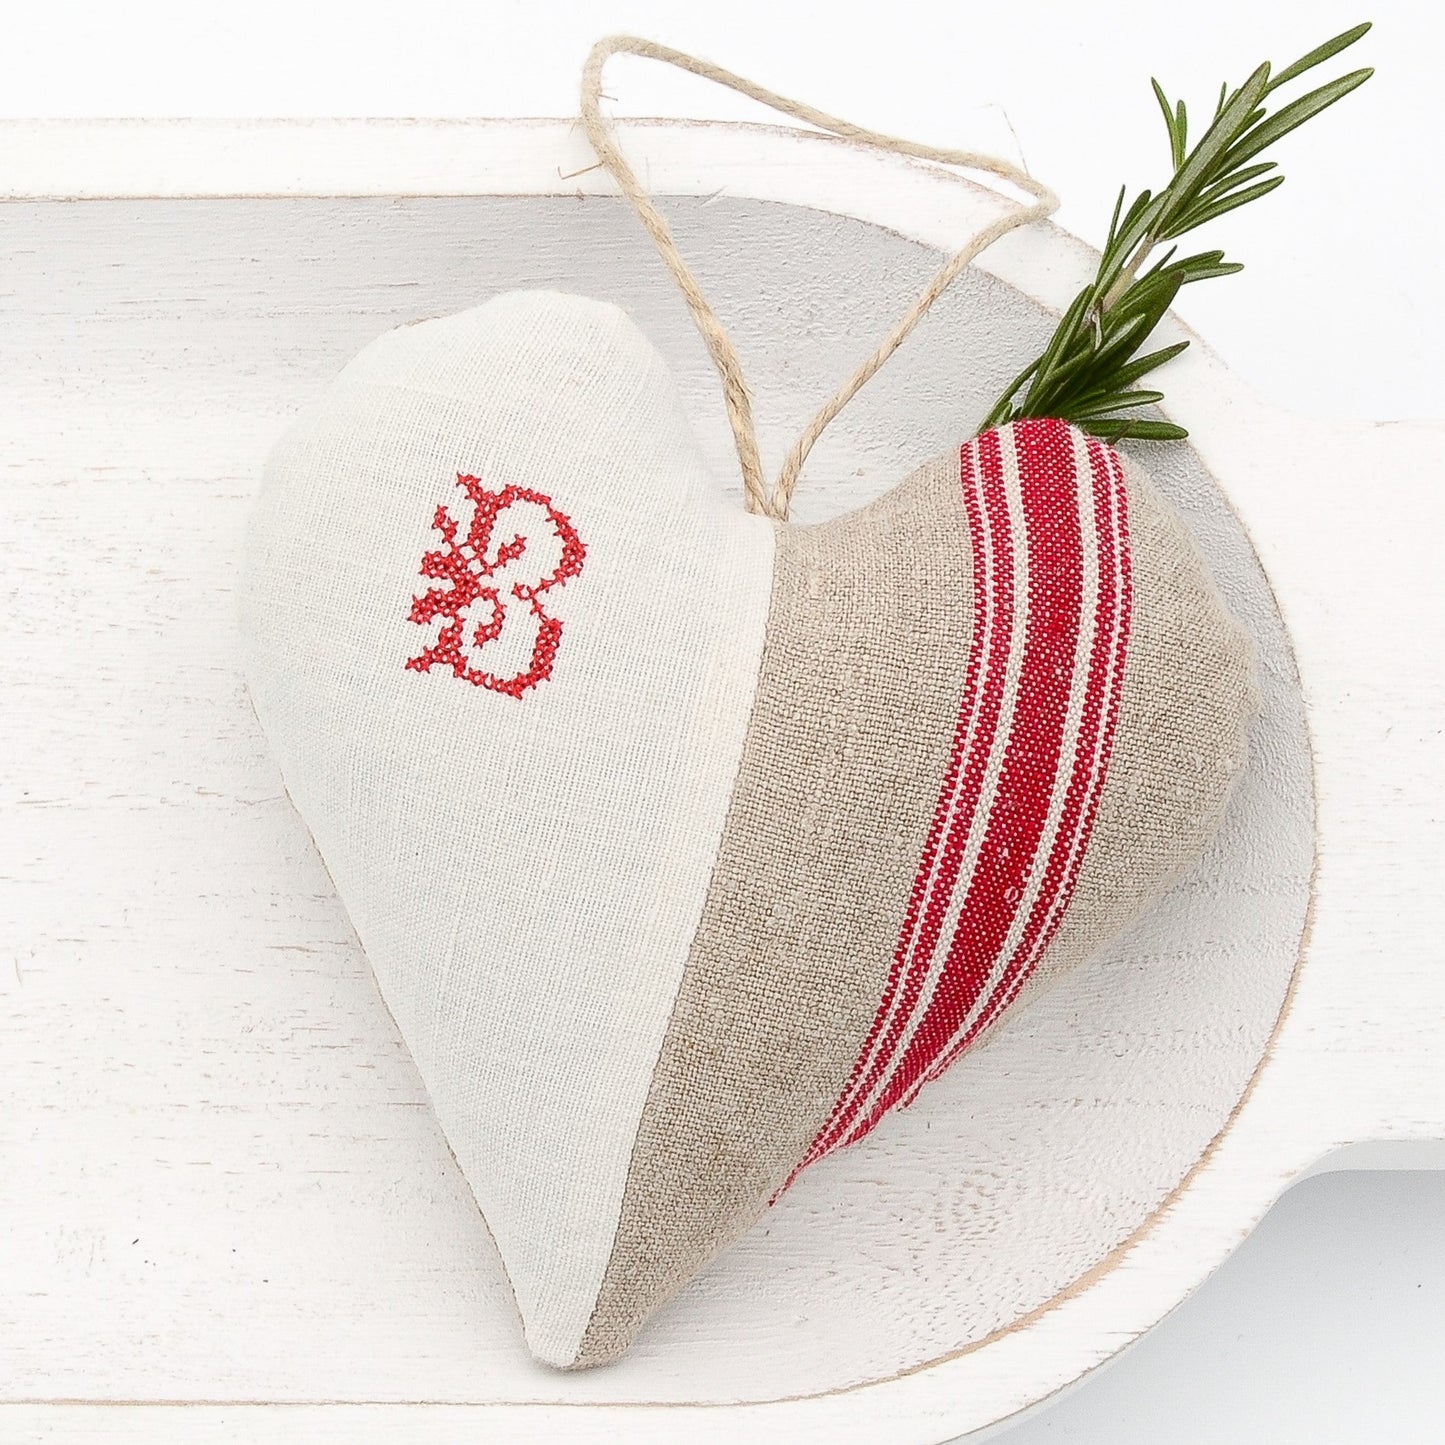 Antique European white linen and red-striped German mangle cloth natural tone linen lavender sachet heart, letter "B" monogram (all letters available) embroidered in red cross stitch, hemp twine tie, filled with high quality lavender from Provence France